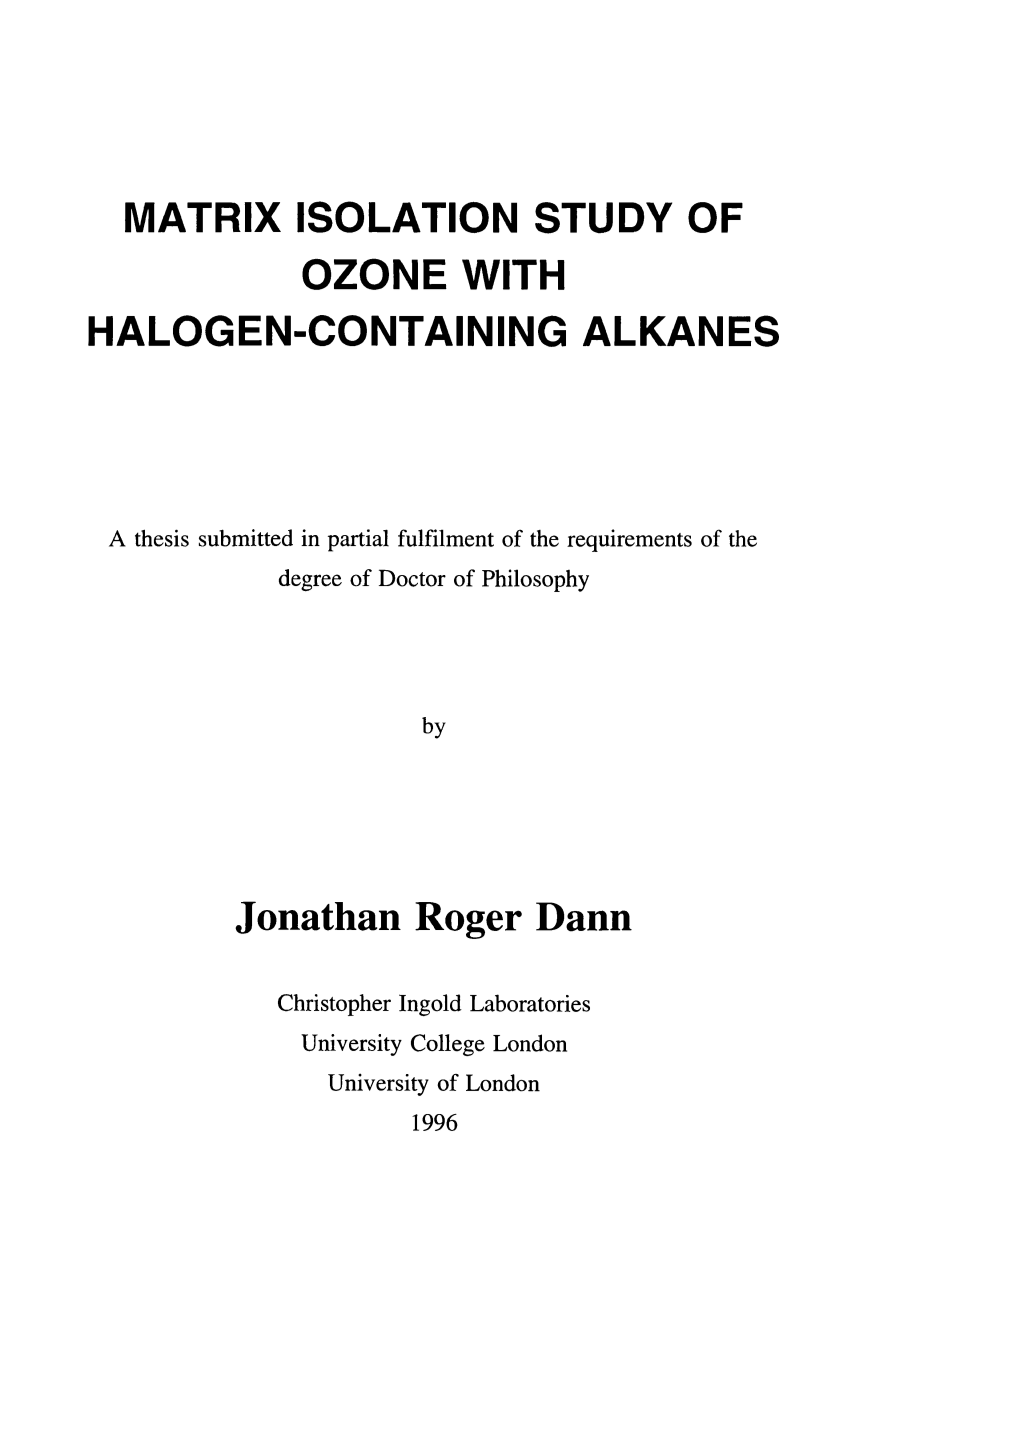 Matrix Isolation Study of Ozone with Some Halogen Containing Alkanes